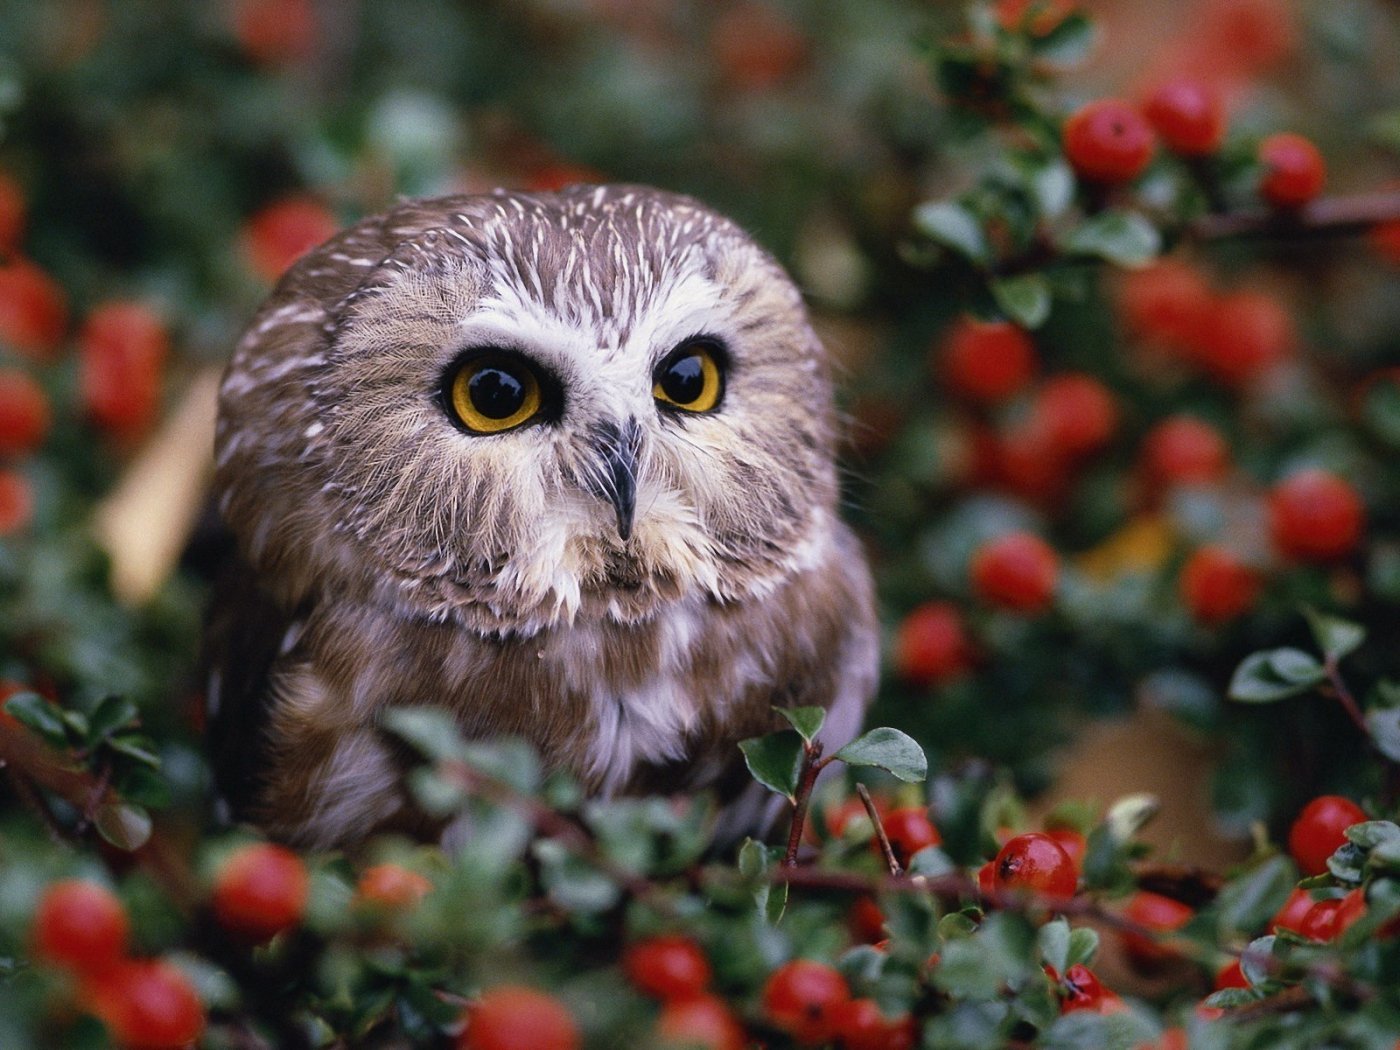 Owl Wallpaper 1400x1050 WallpapersOwl 1400x1050 Wallpapers Pictures